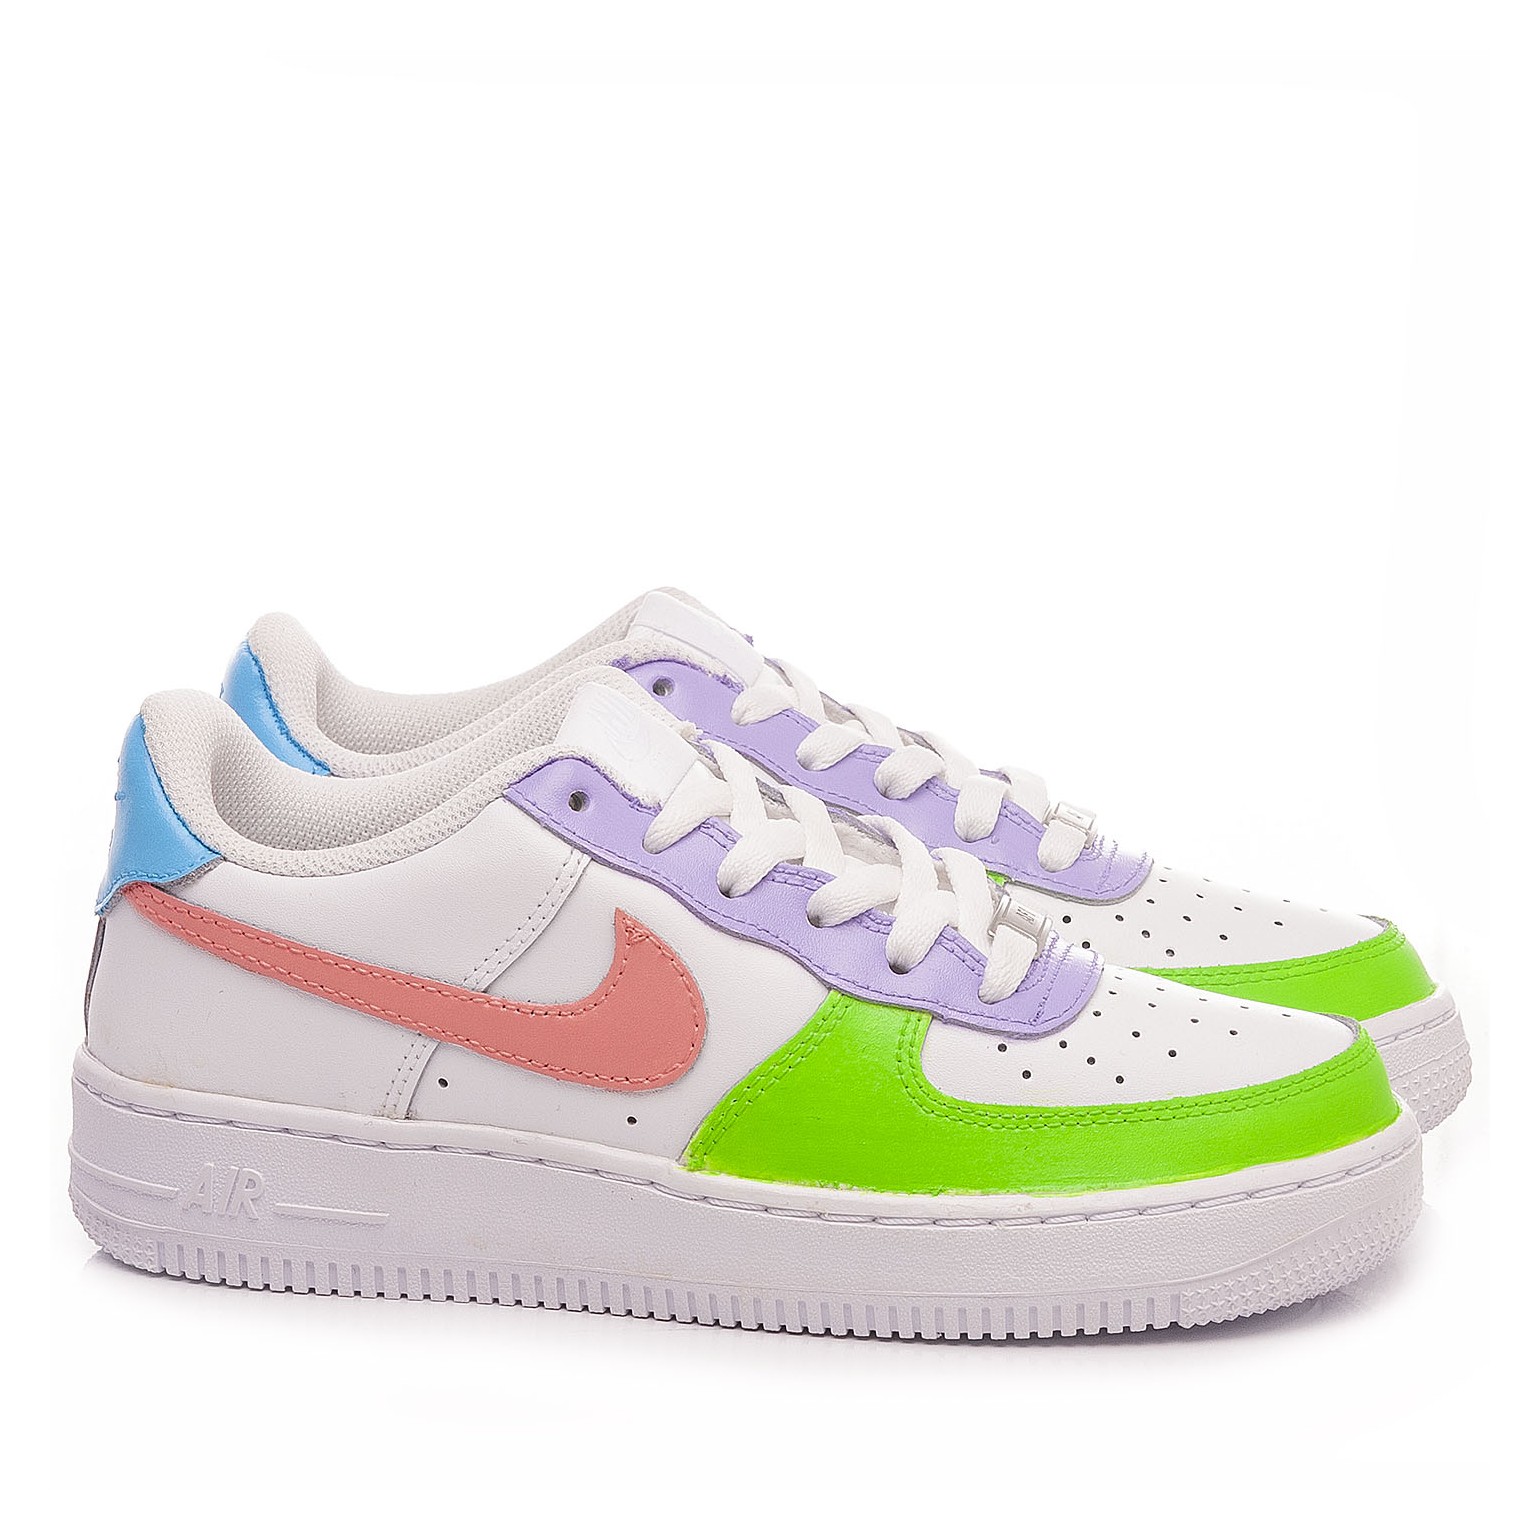 Oportuno agradable Telemacos Nike Sneakers Air Force Costumized